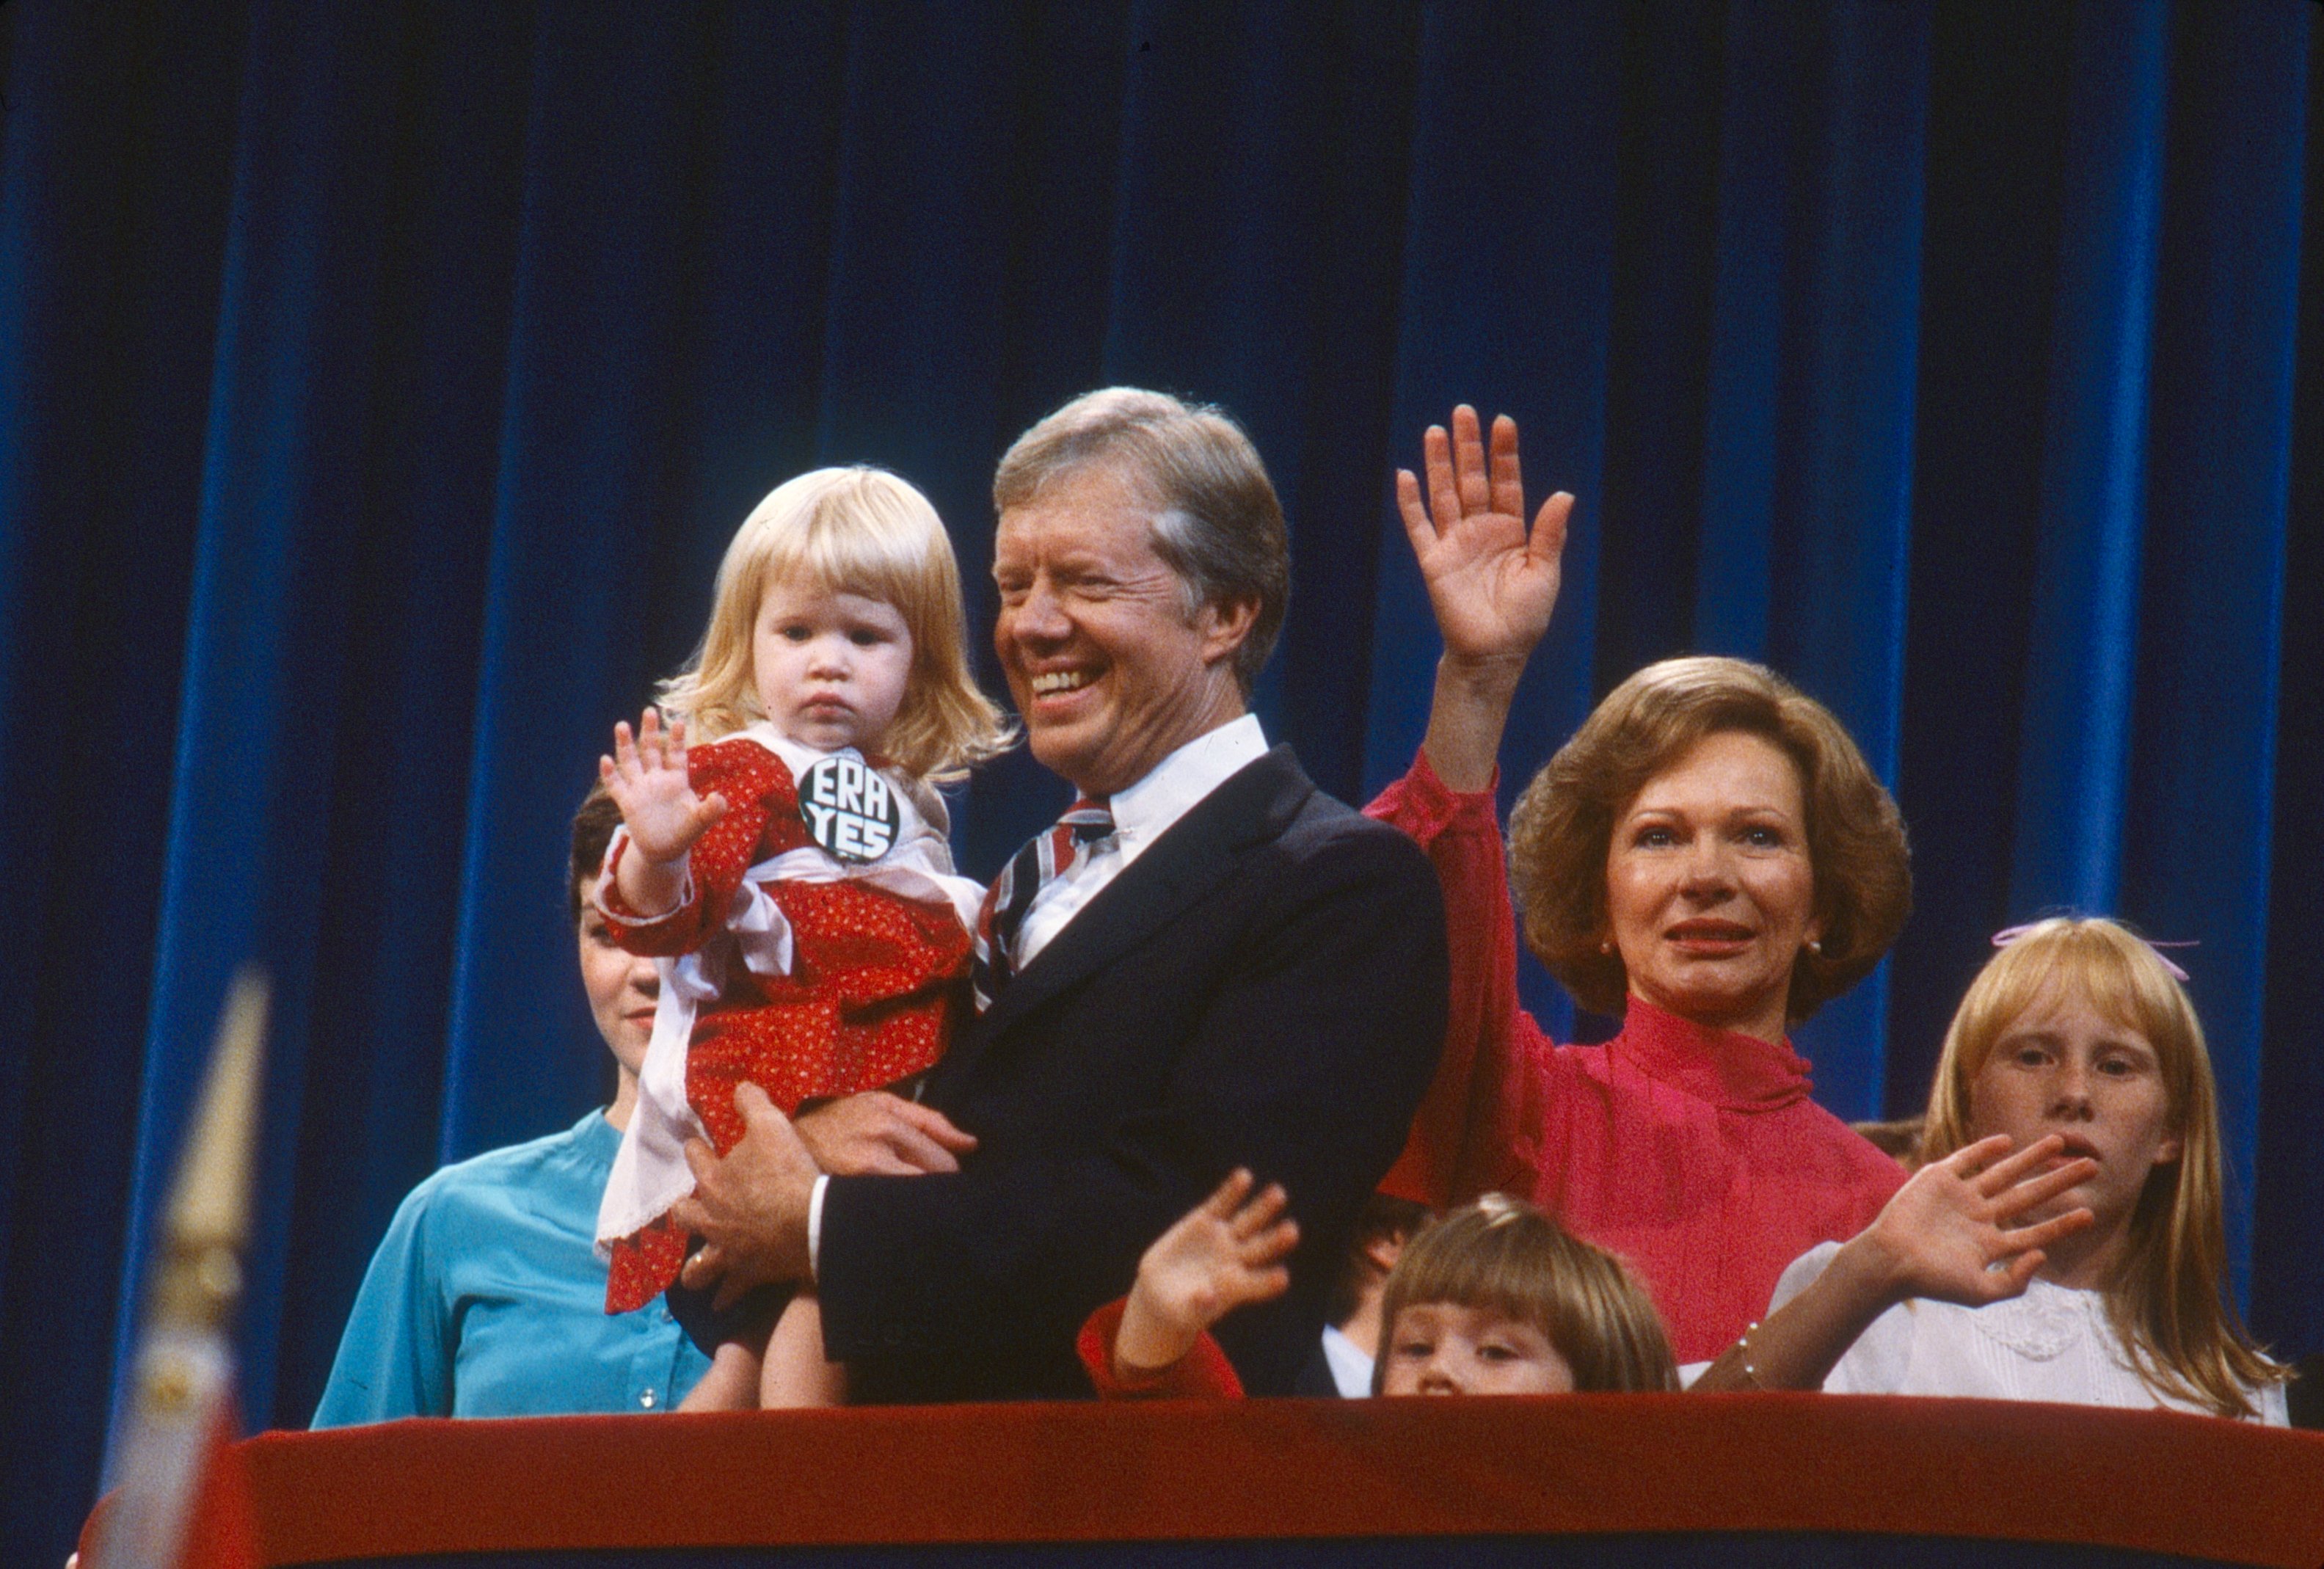 Former president Jimmy Carter with Sarah Carter, First Lady Rosalynn Carter, Amy Carter, and others along with others, on stage at the 1980 National Democratic Convention which took place at Madison Square Garden in New York, NY, from August 11 to 14, 1980. | Source: Getty Images 